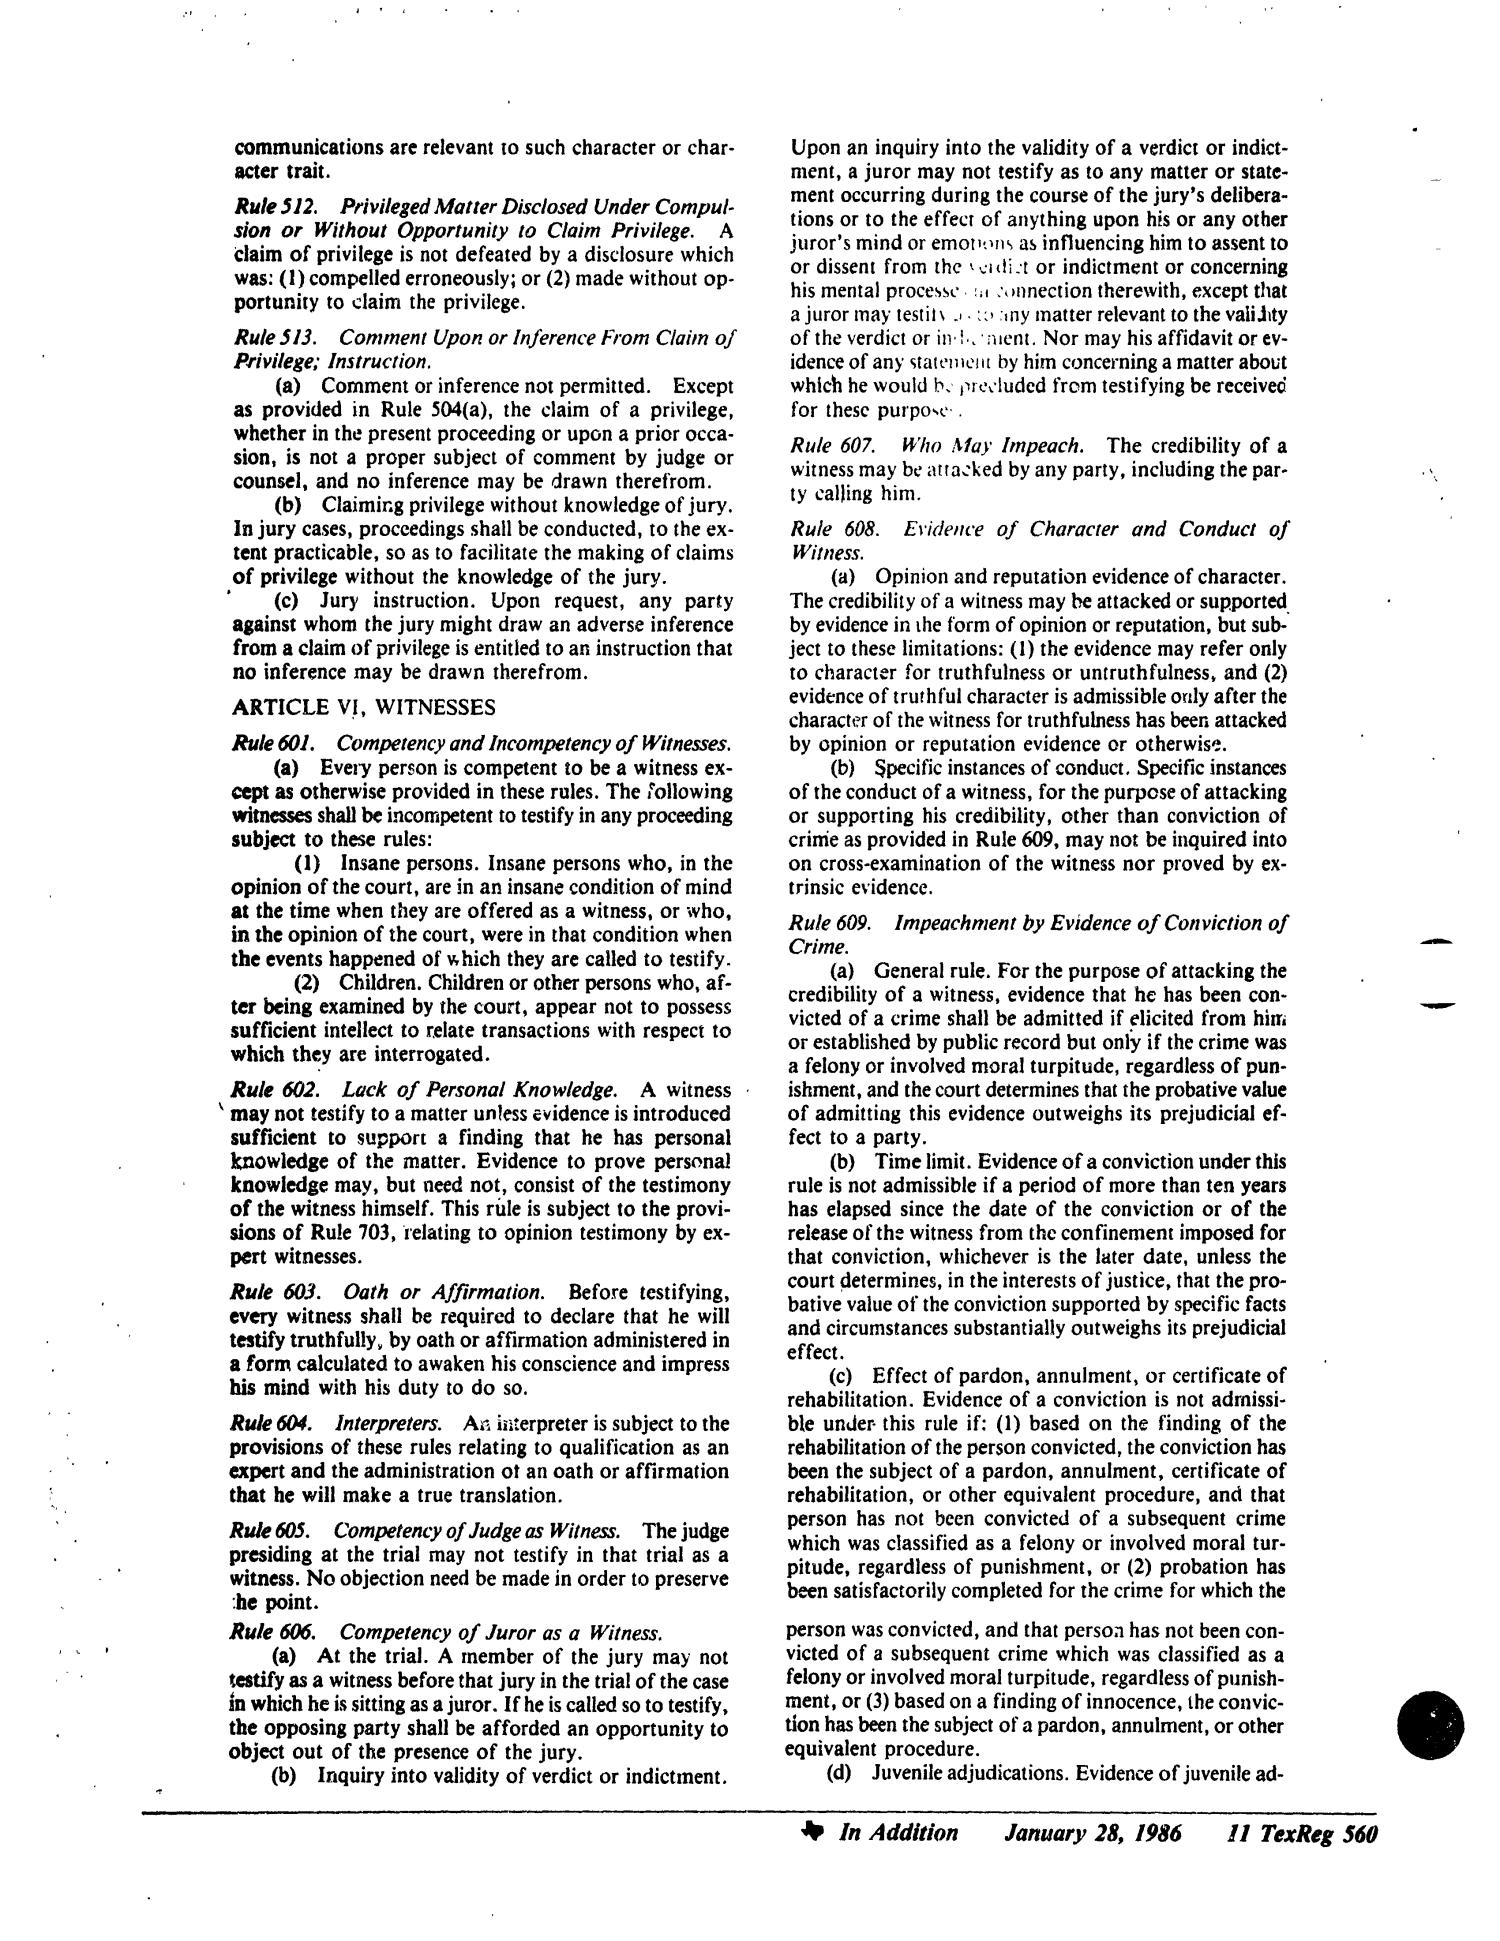 Texas Register, Volume 11, Number 8, Pages 484-569, January 28, 1986
                                                
                                                    560
                                                